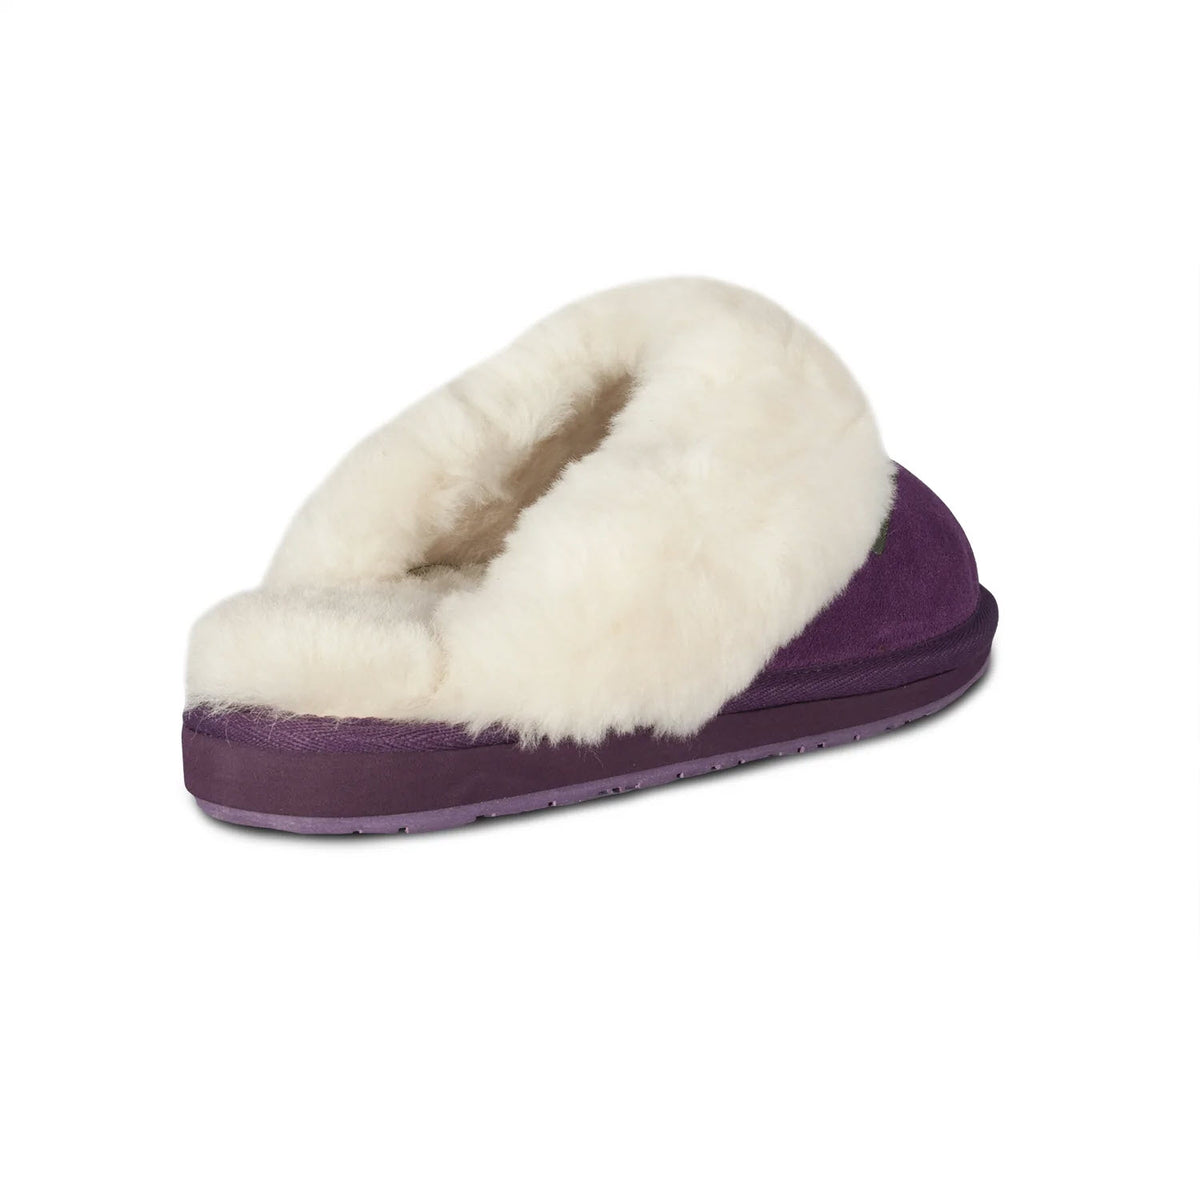 A single Cloud Nine Ladies Scuff Purple slipper isolated on a white background.